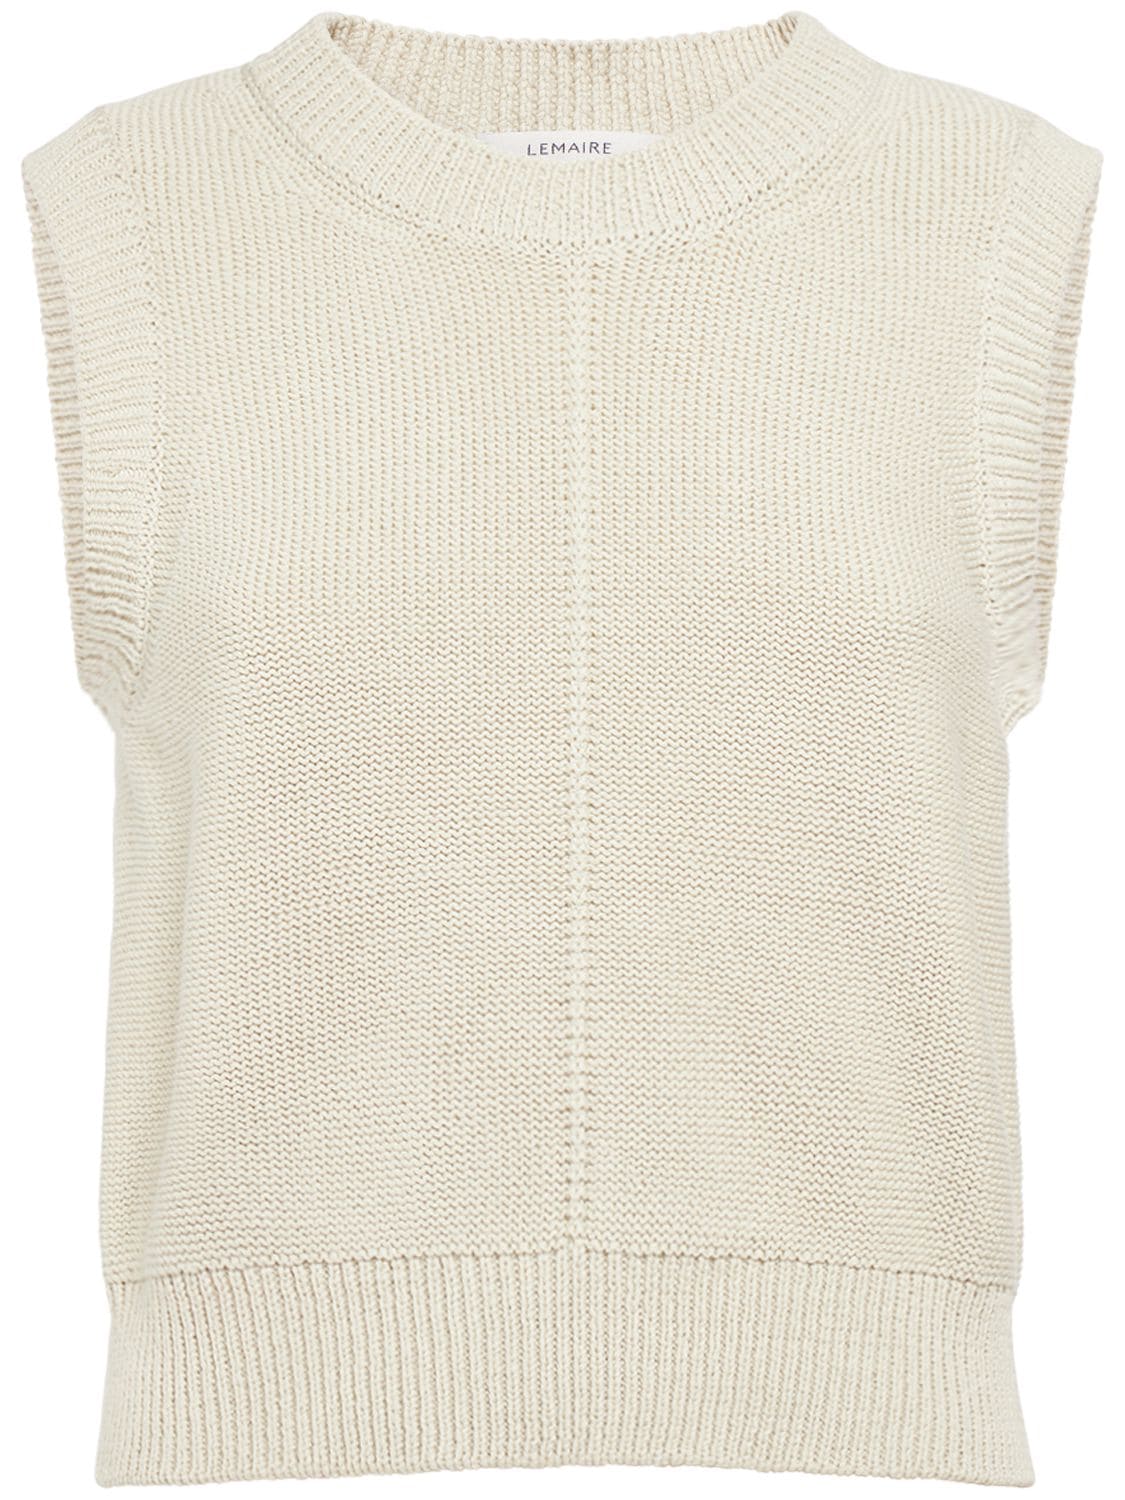 Lemaire Sleeveless Cropped Cotton Knit Sweater In Grey